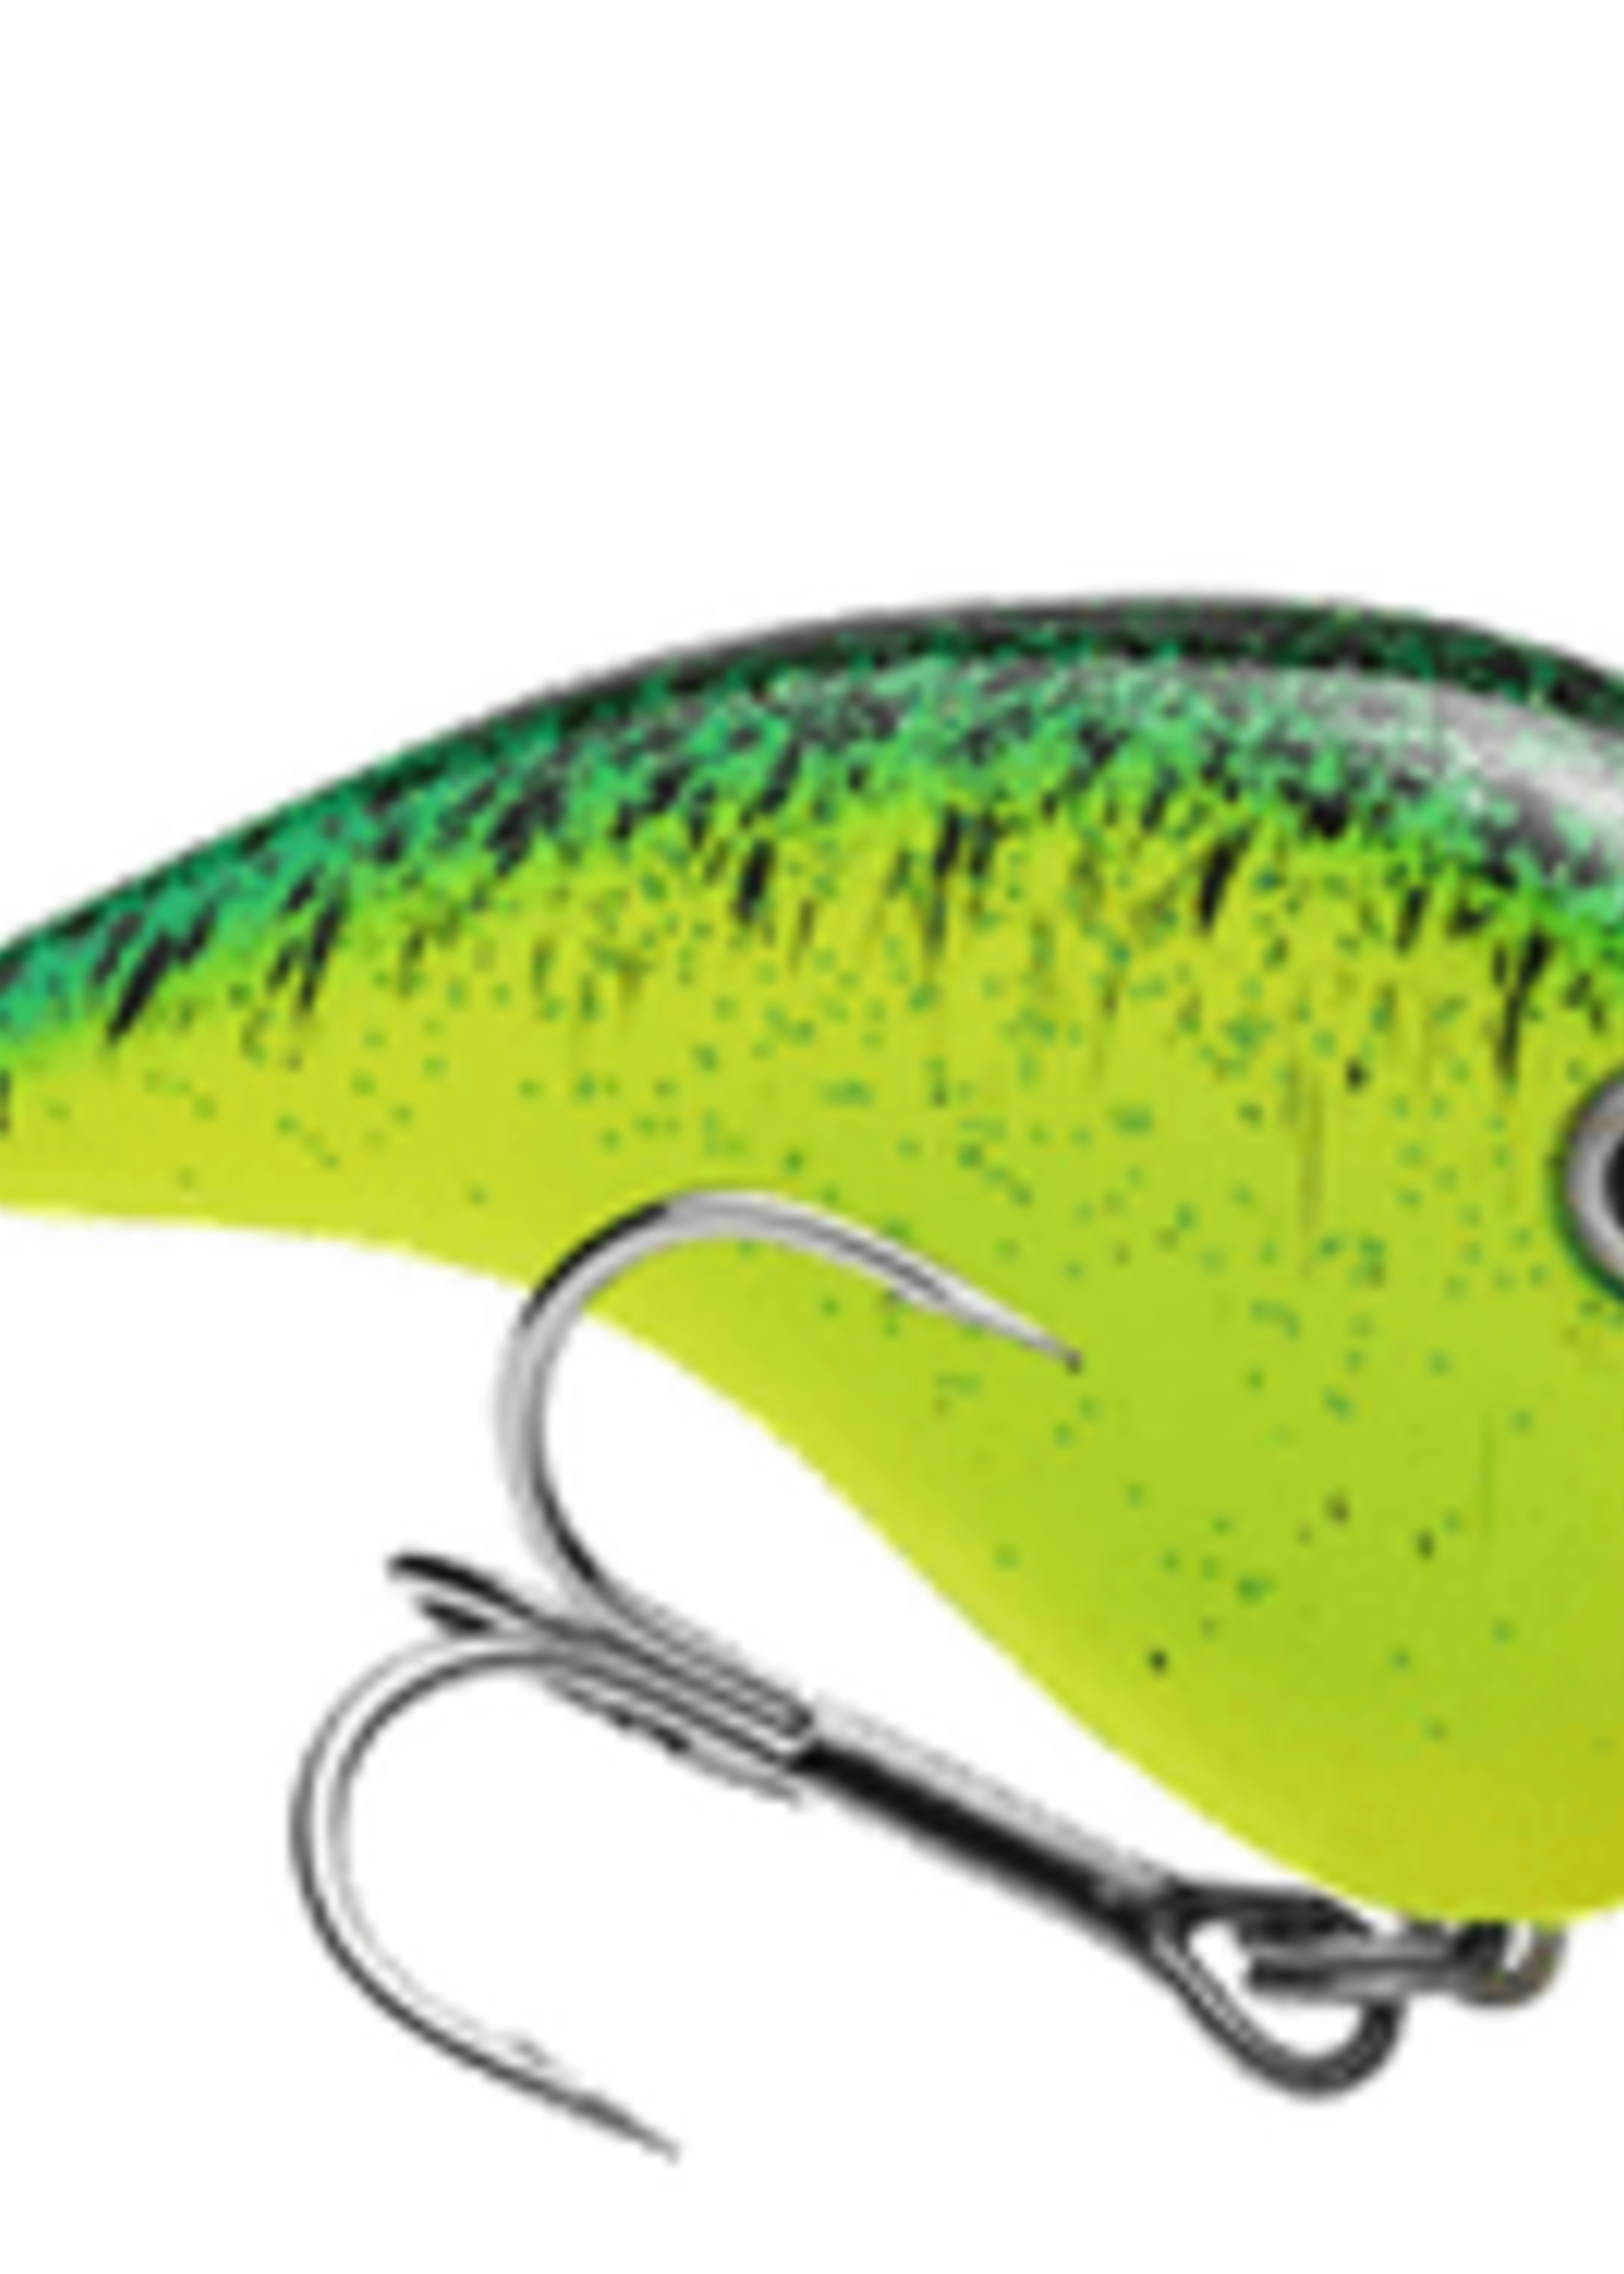 Strike King Chick Magnet Flatsided Crankbait - Chartreuse with Blue / Black  - Appalachian Outdoor Supply